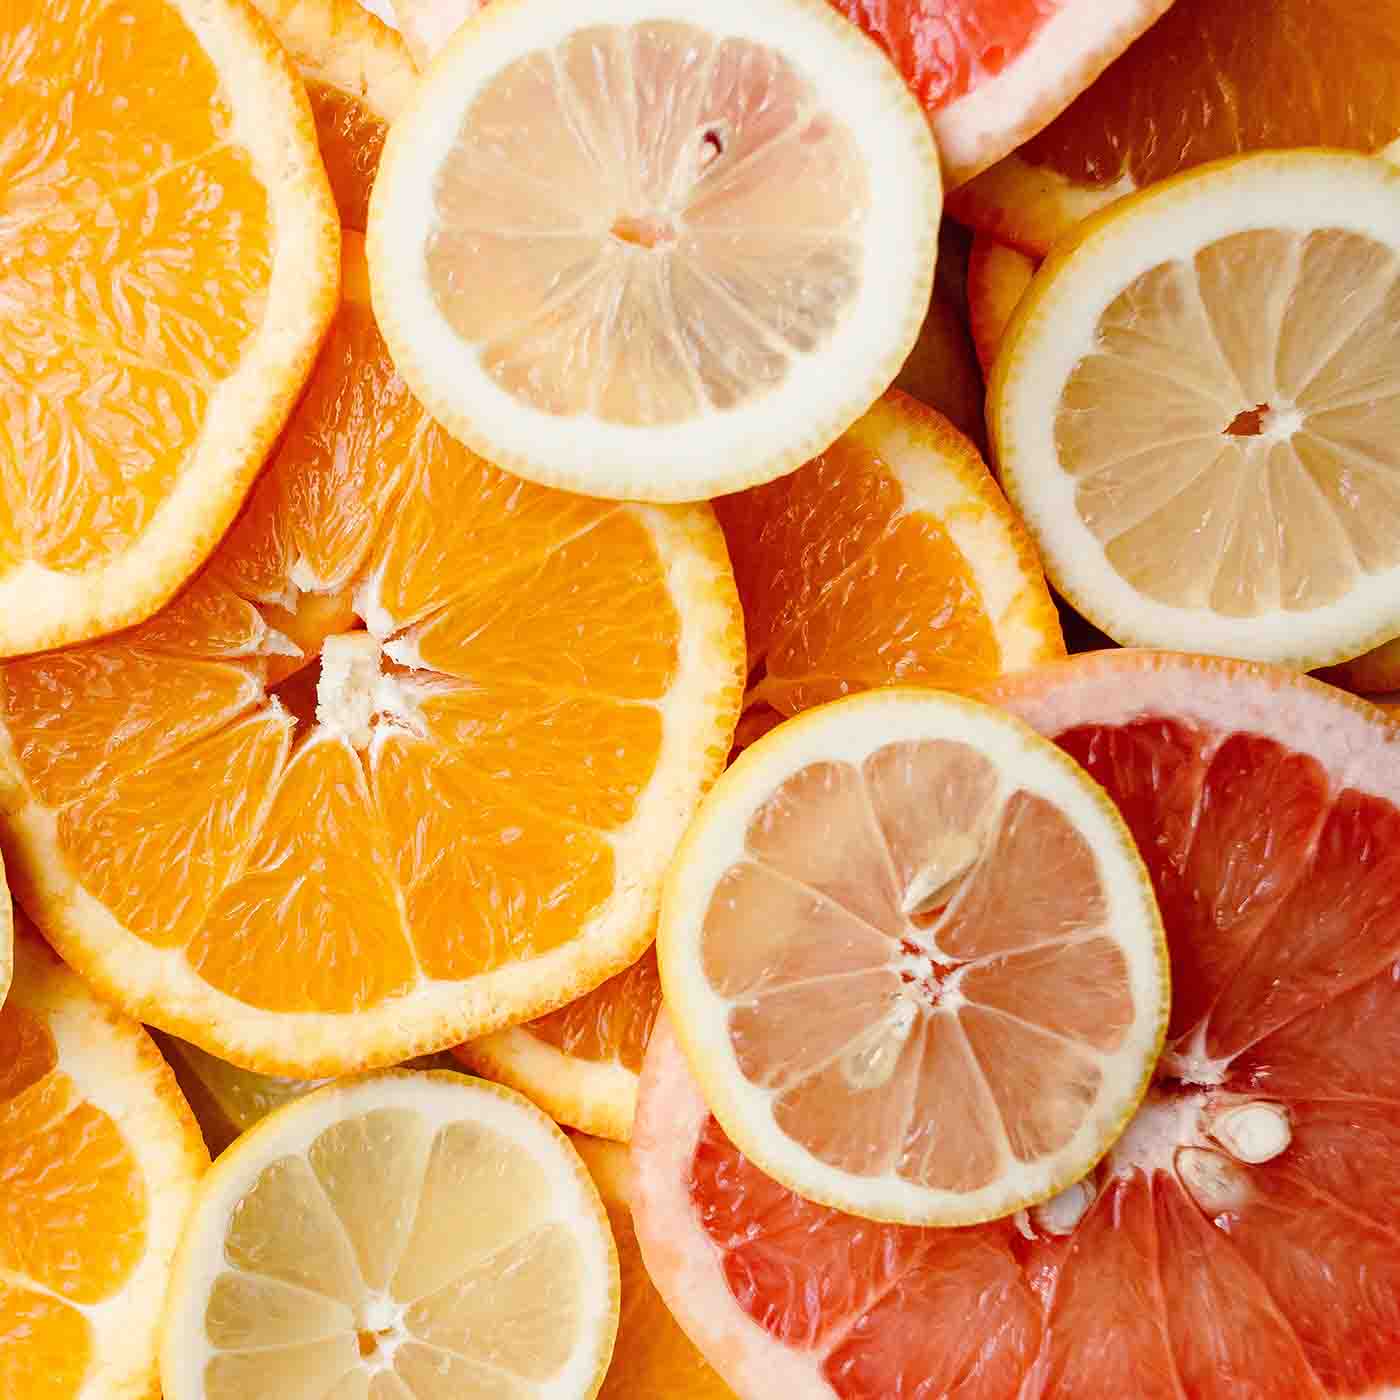 Layered slices of fresh citrus fruits